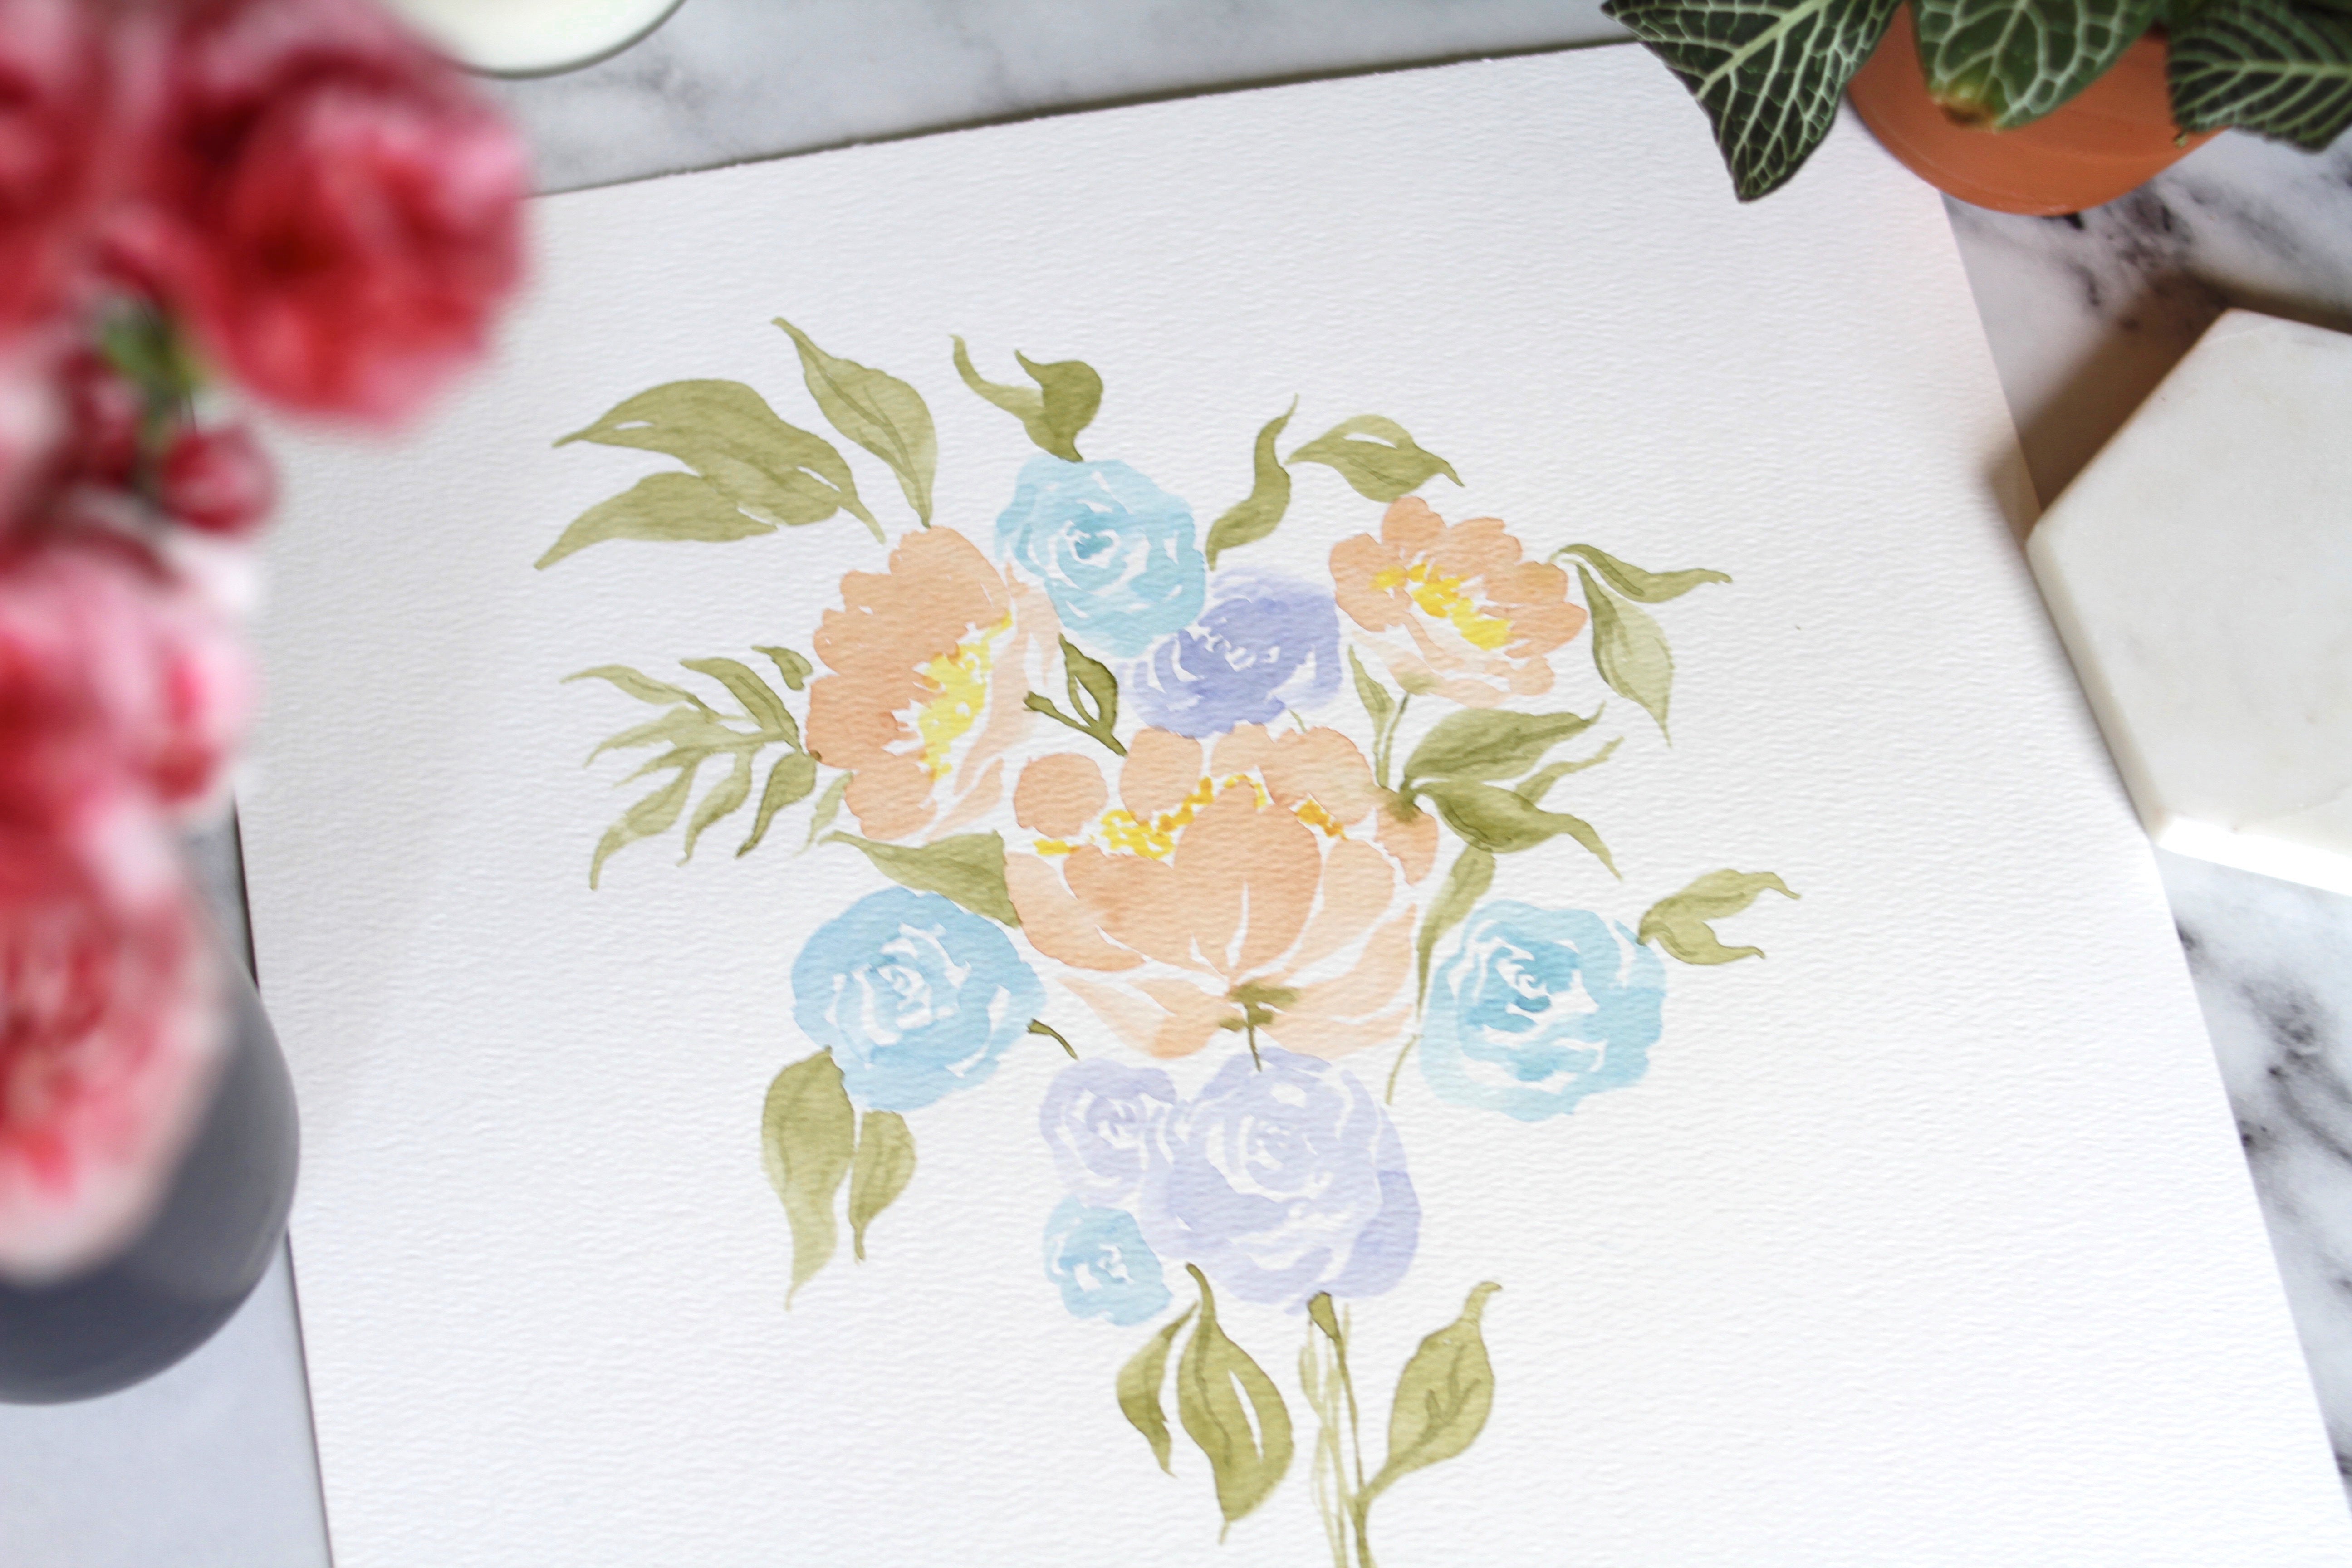 12x12 hand-painted bouquet